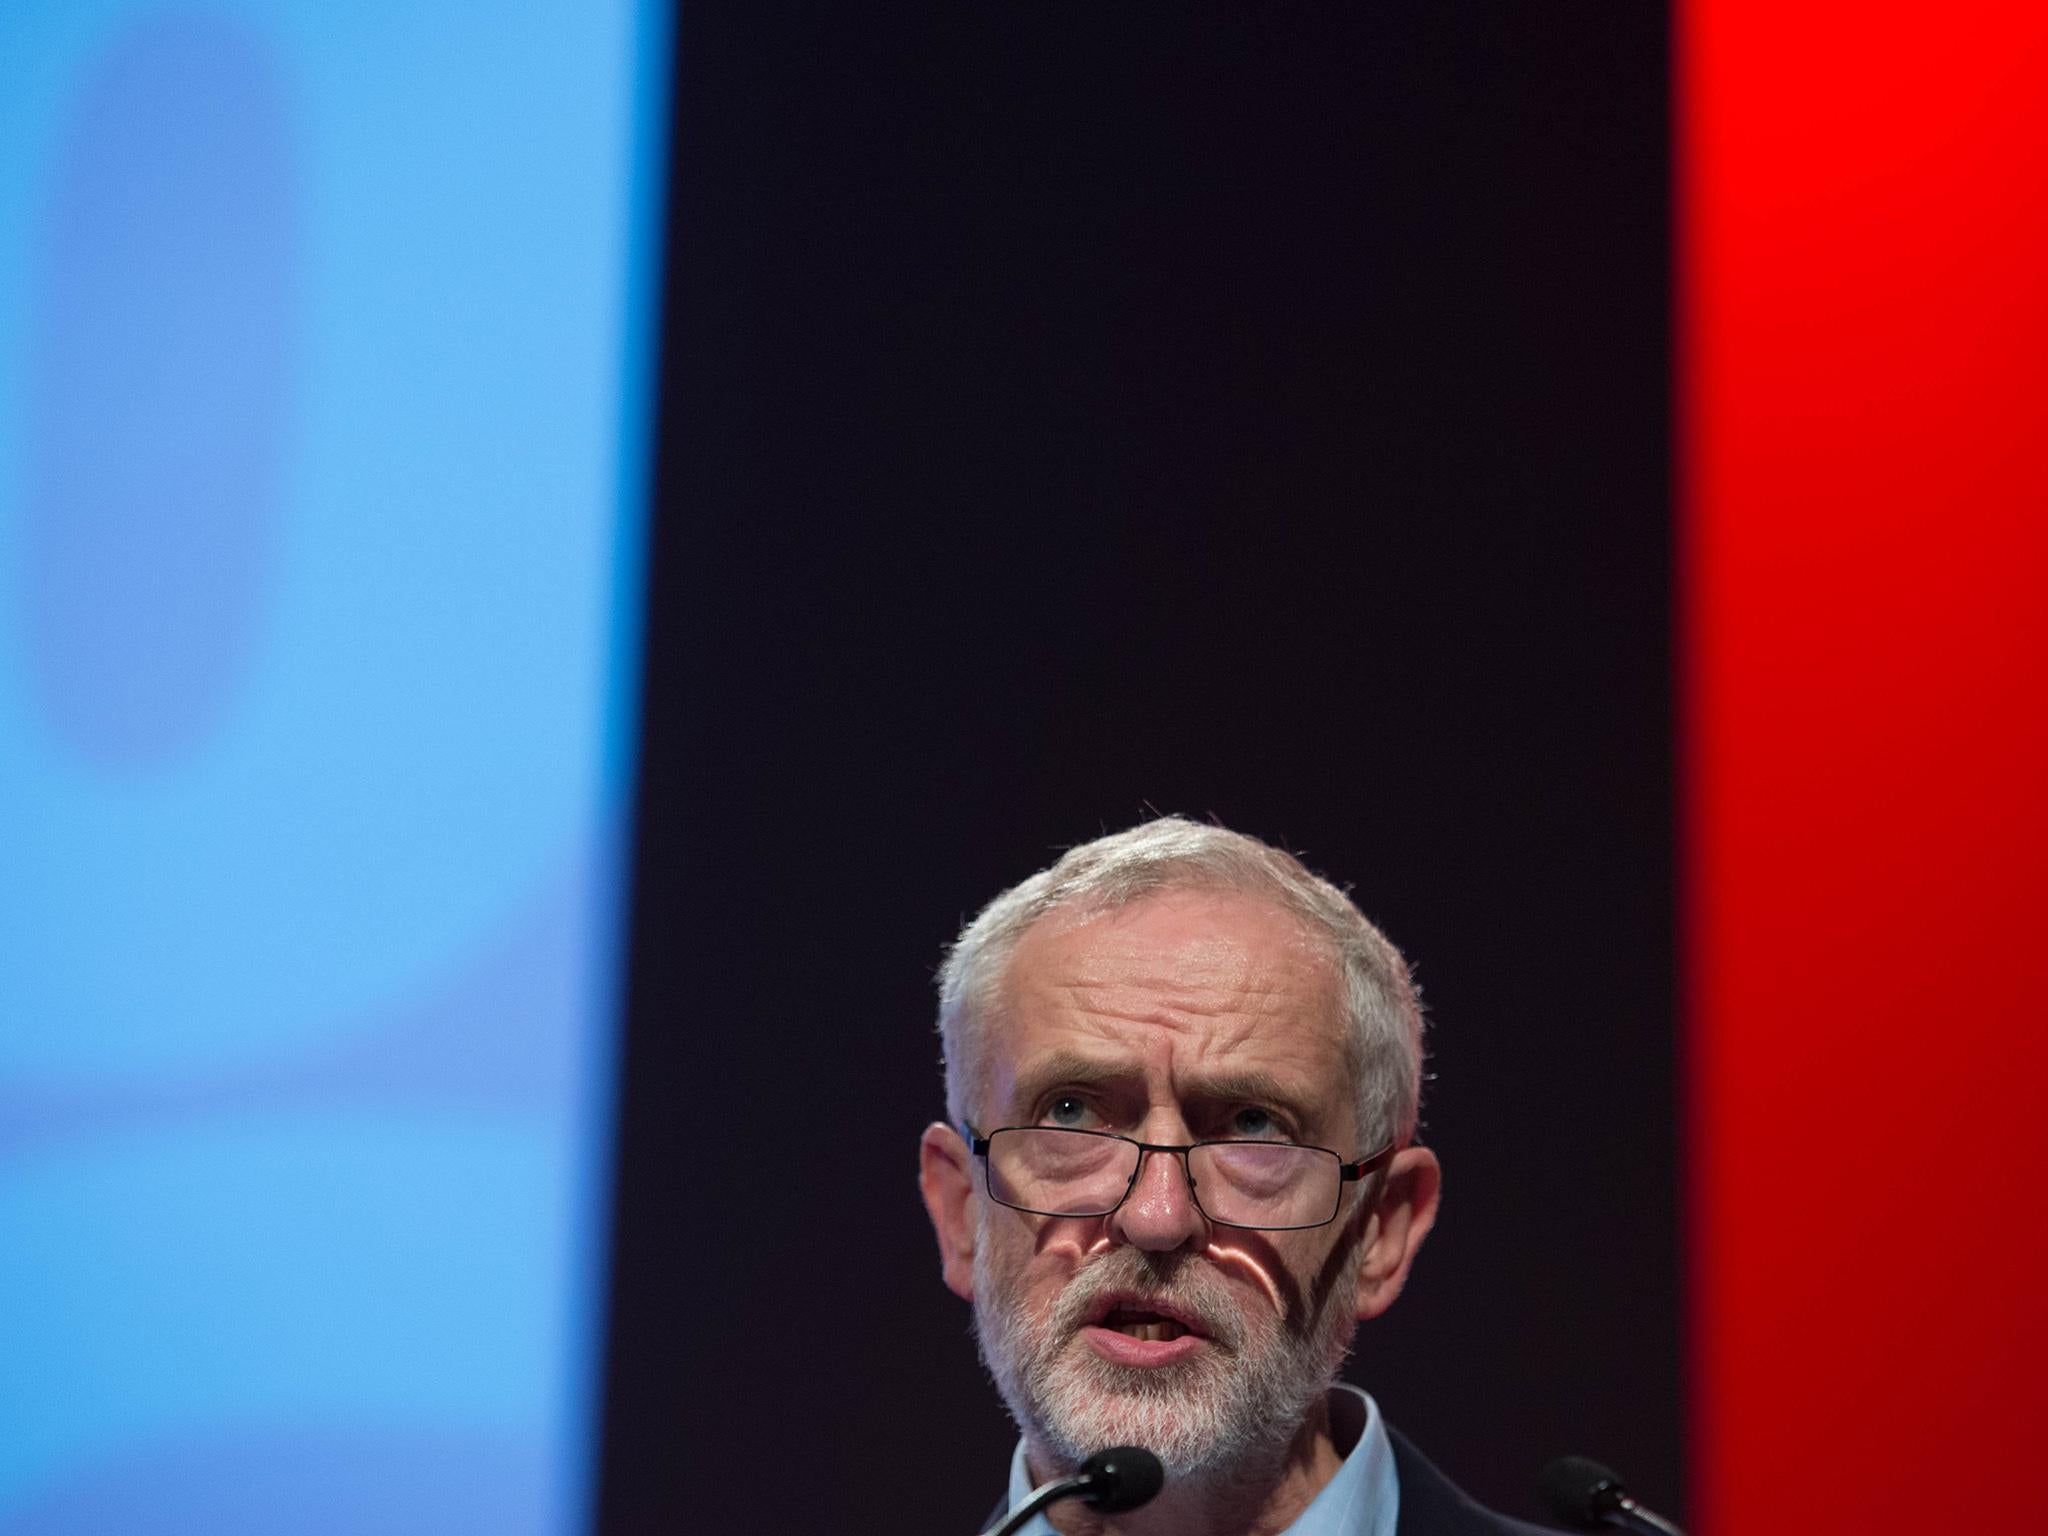 Many in the Labour party feared Corbyn’s stance on immigration would harm their election chances